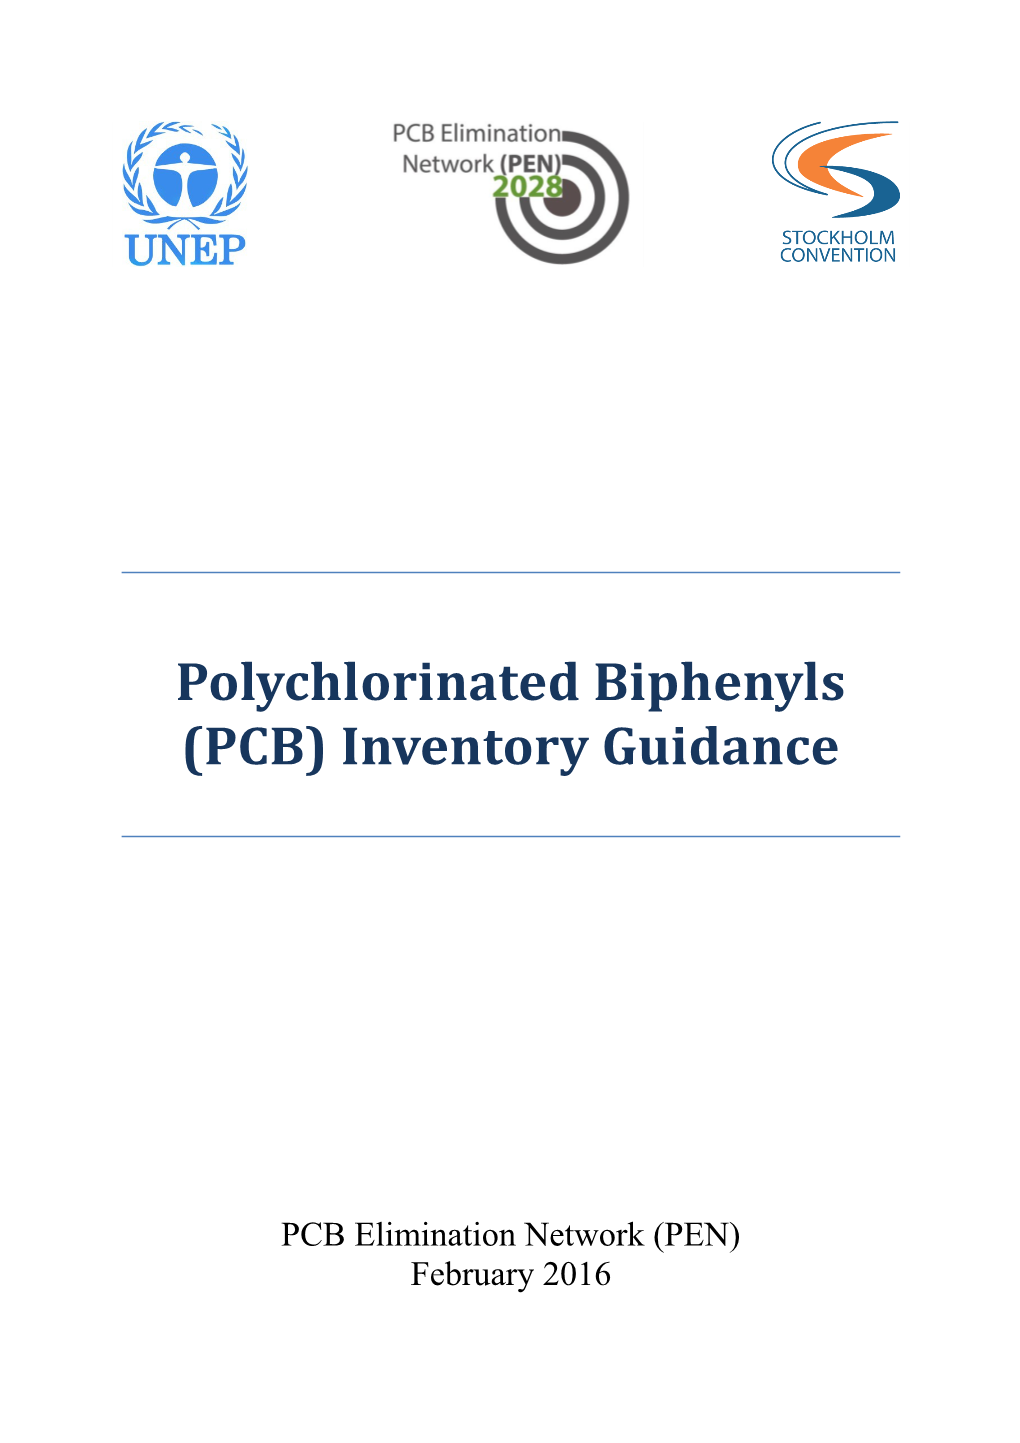 Polychlorinated Biphenyls (PCB) Inventory Guidance